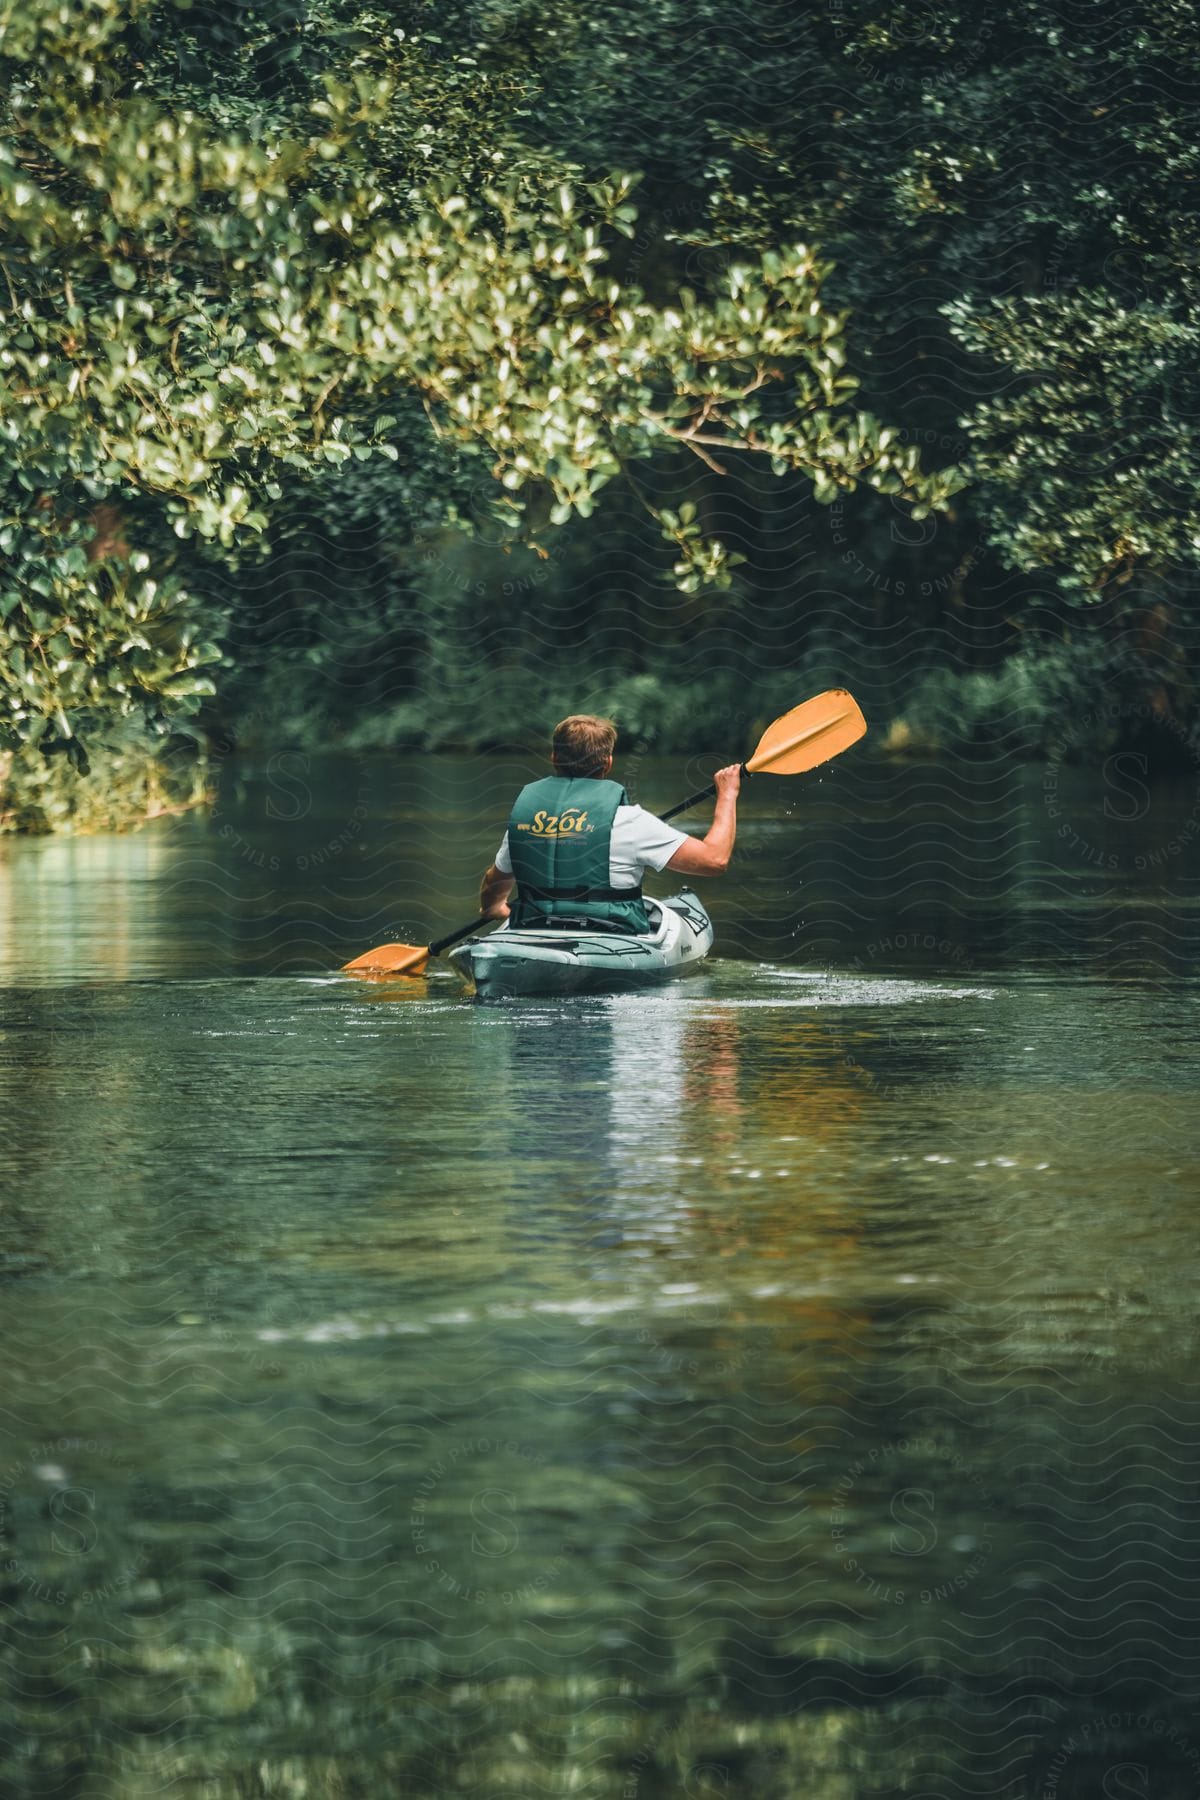 A man is backwards in a kayak wearing a green vest and orange paddle while sailing on a river